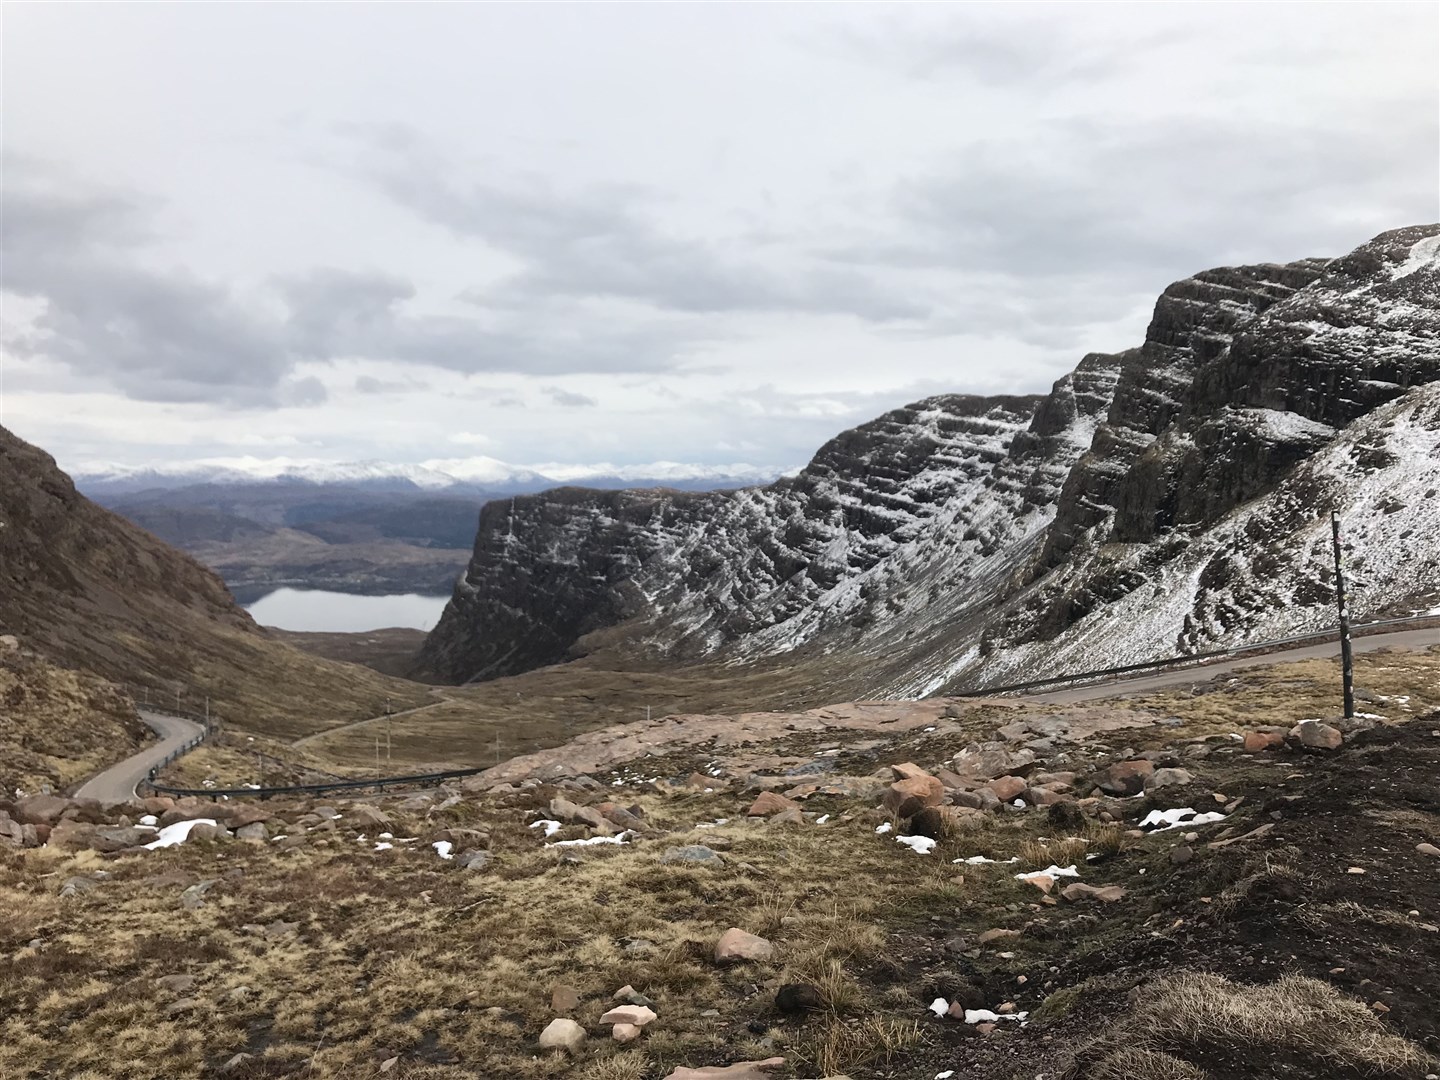 Rachel Smart took this image of the Bealach on a trip to Appleross.